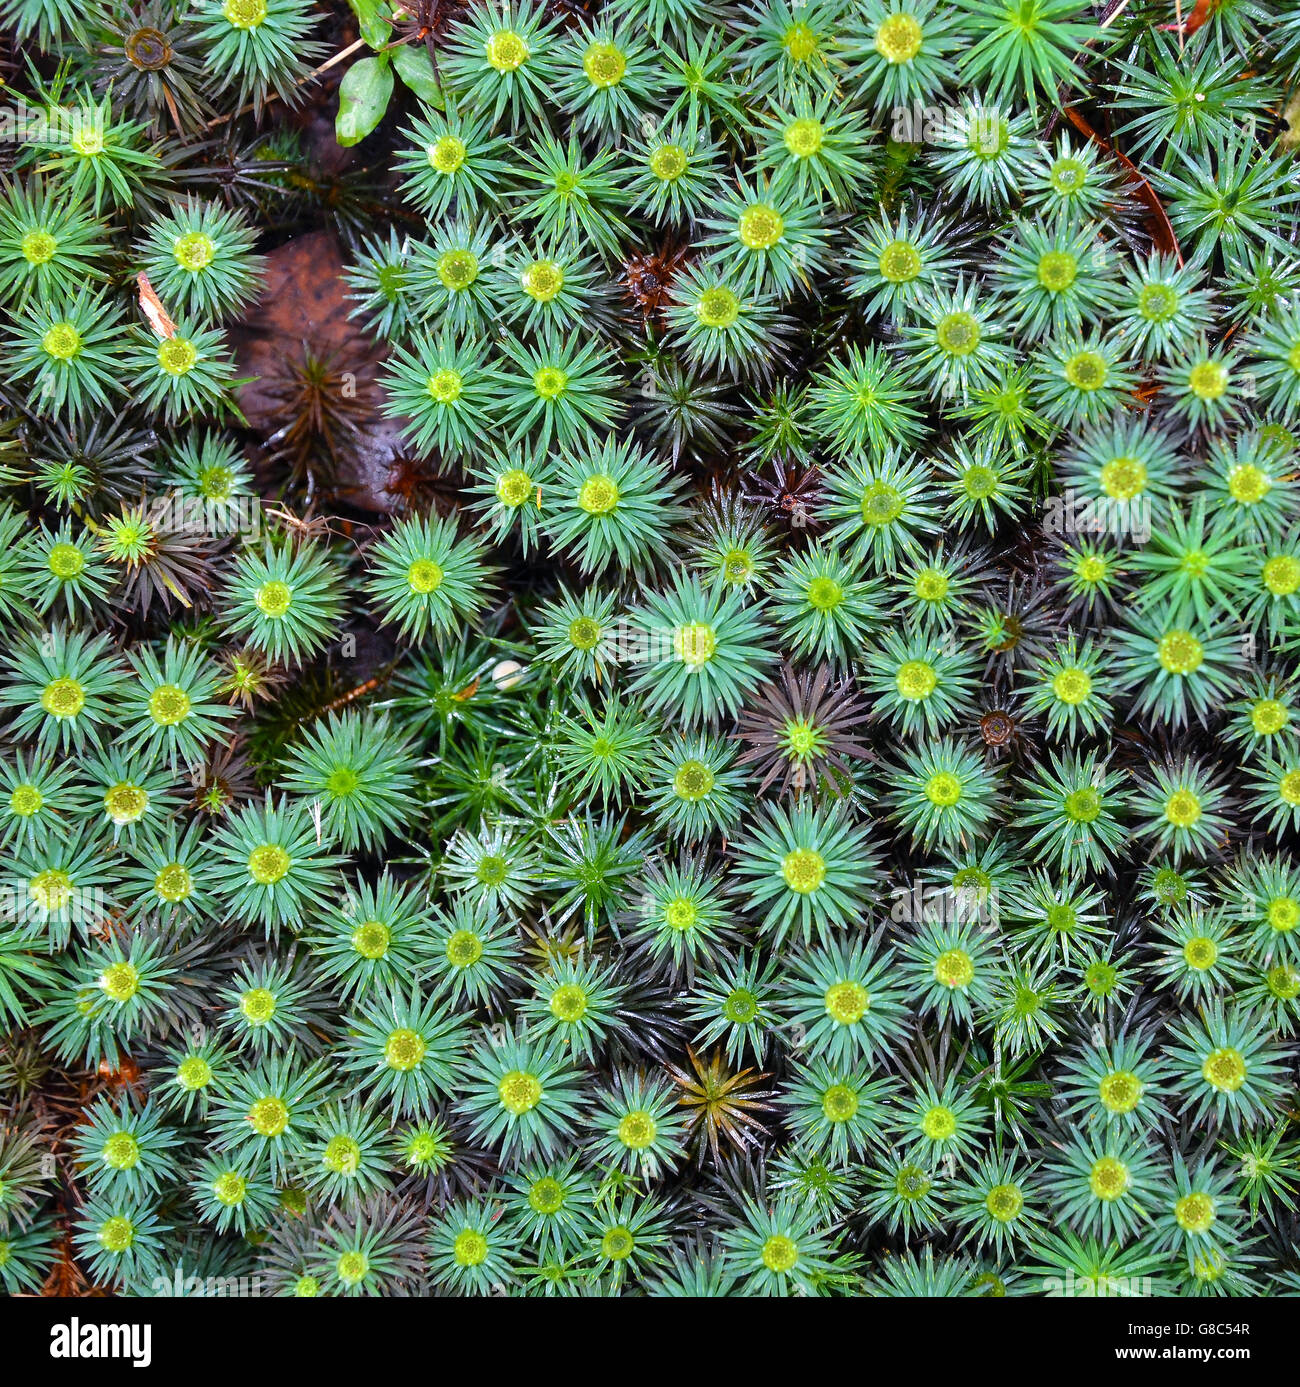 https://www.alamy.com/stock-photo-giant-moss-dawsonia-polytrichoides-forming-a-ground-cover-in-australian-108446935.html